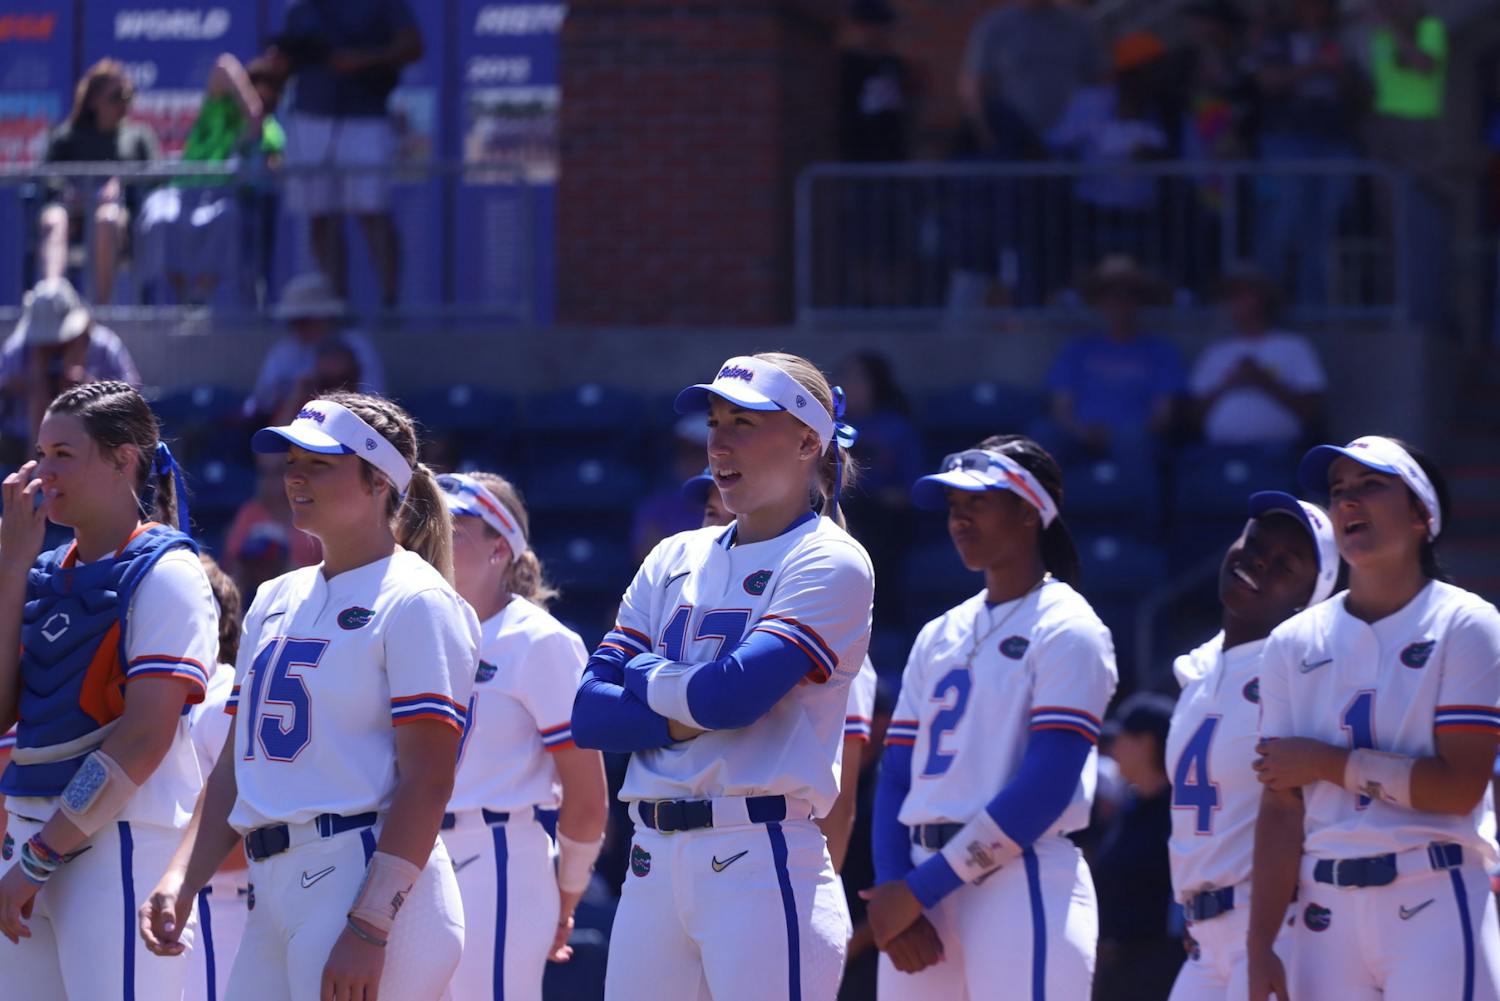 The Florida Gators fell in game one of their Super Regional against Virginia Tech.